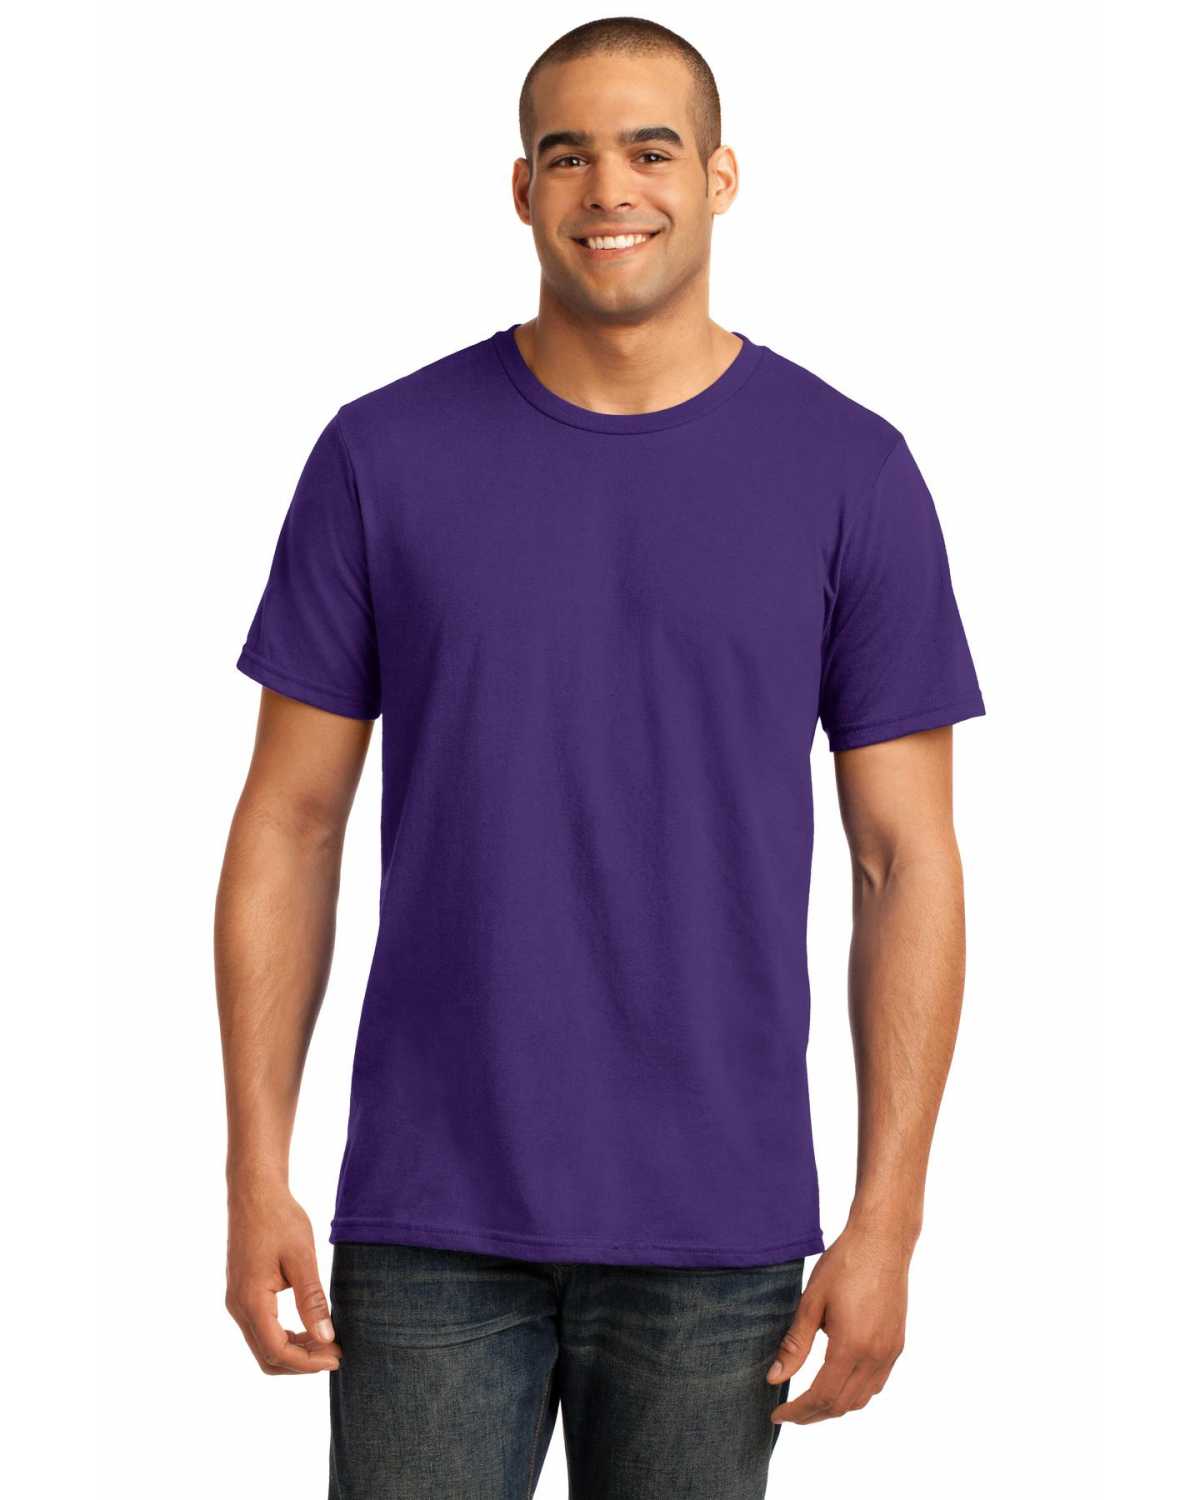 Anvil 980 100% Combed Ring Spun Cotton T-Shirt on discount | ApparelChoice.com